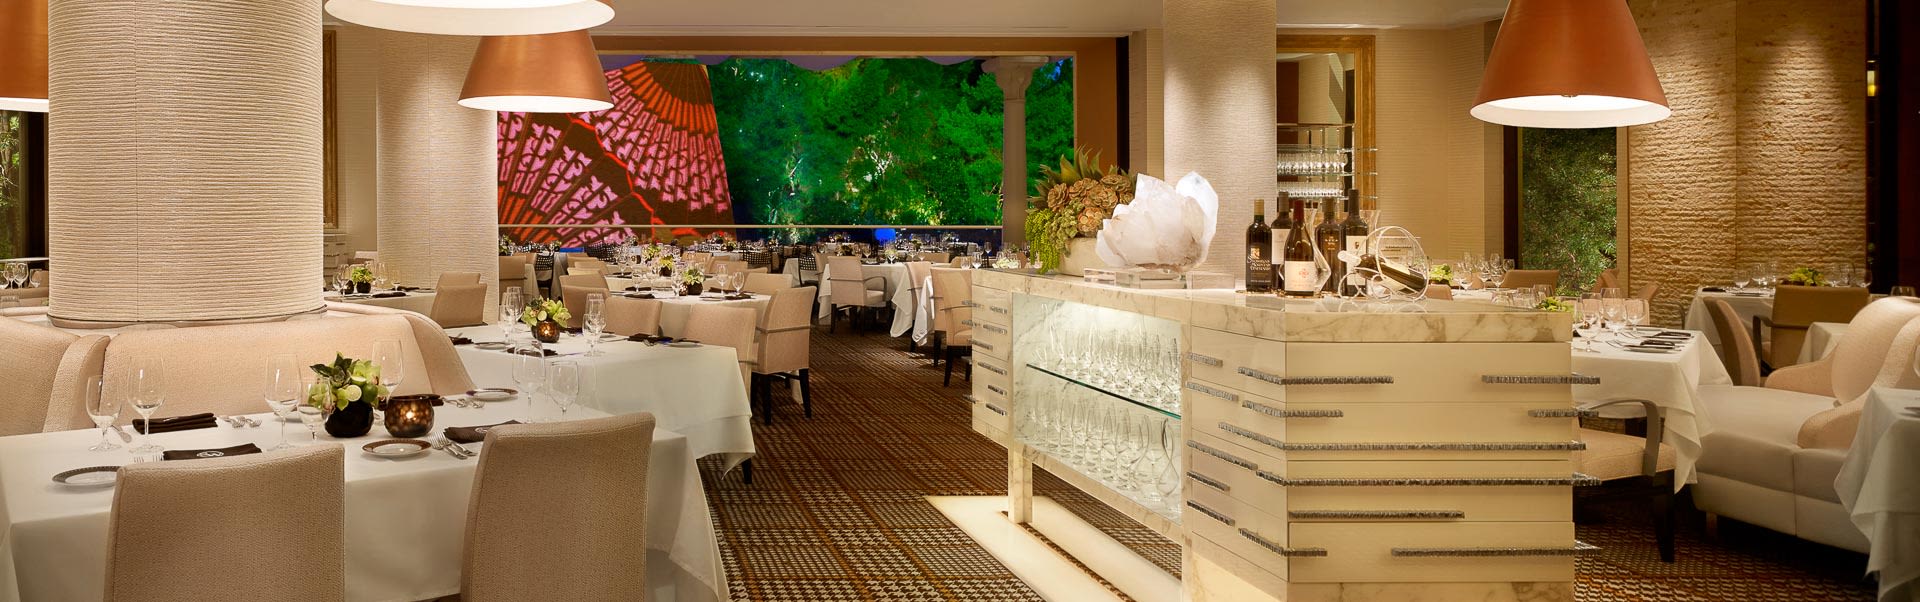 SW Steakhouse on The Wynn Lake of Dreams